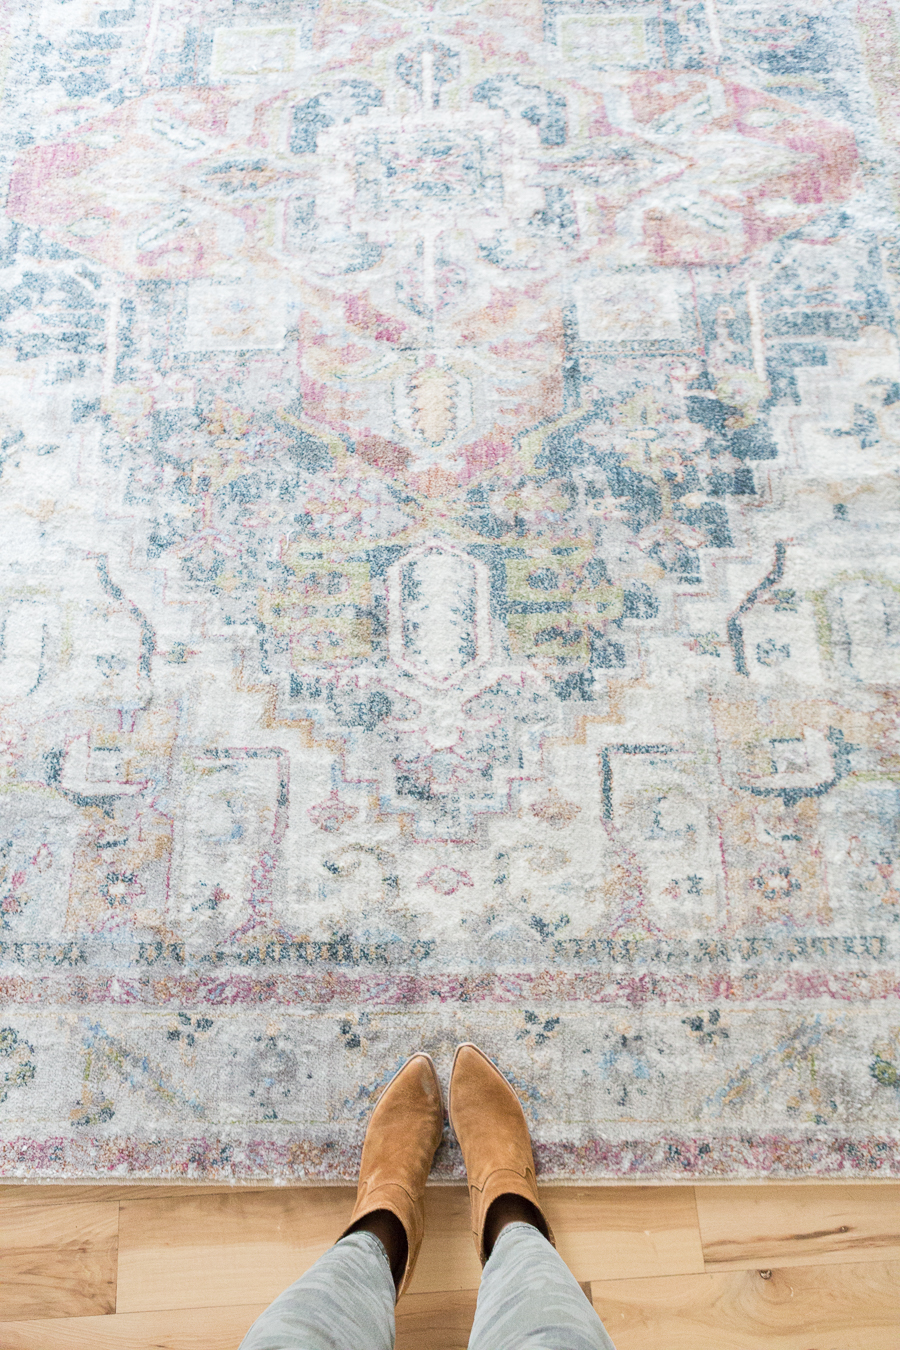 REFRESH YOUR MASTER BEDROOM AND BATH WITH POTTERY BARN looking down at tan booties onto a faded multicolored rug